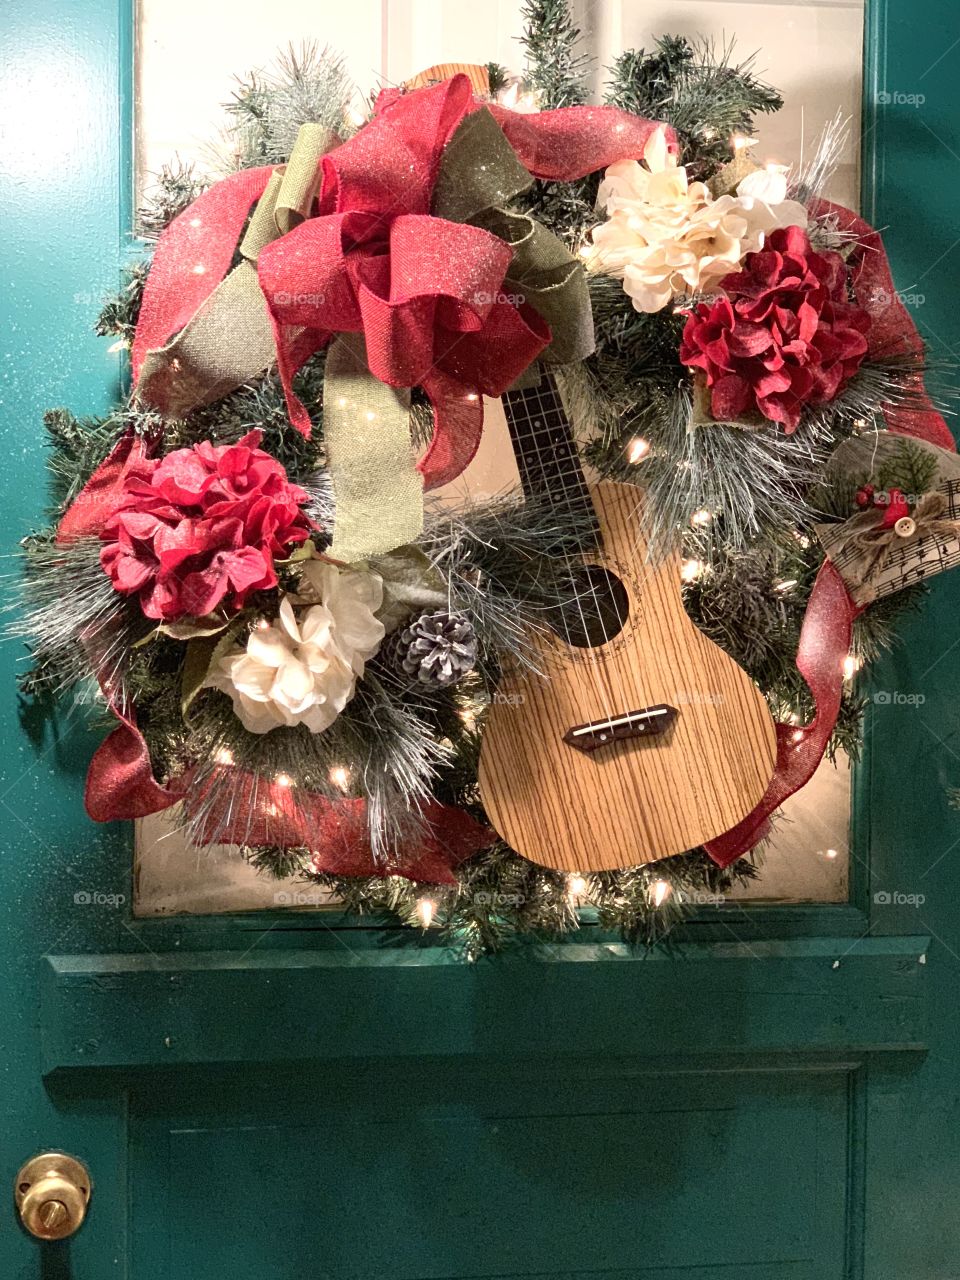 Festive Christmas Wreath on Front Door with red ribbon, musical instrument of a guitar, lights, flowers, pine needles 